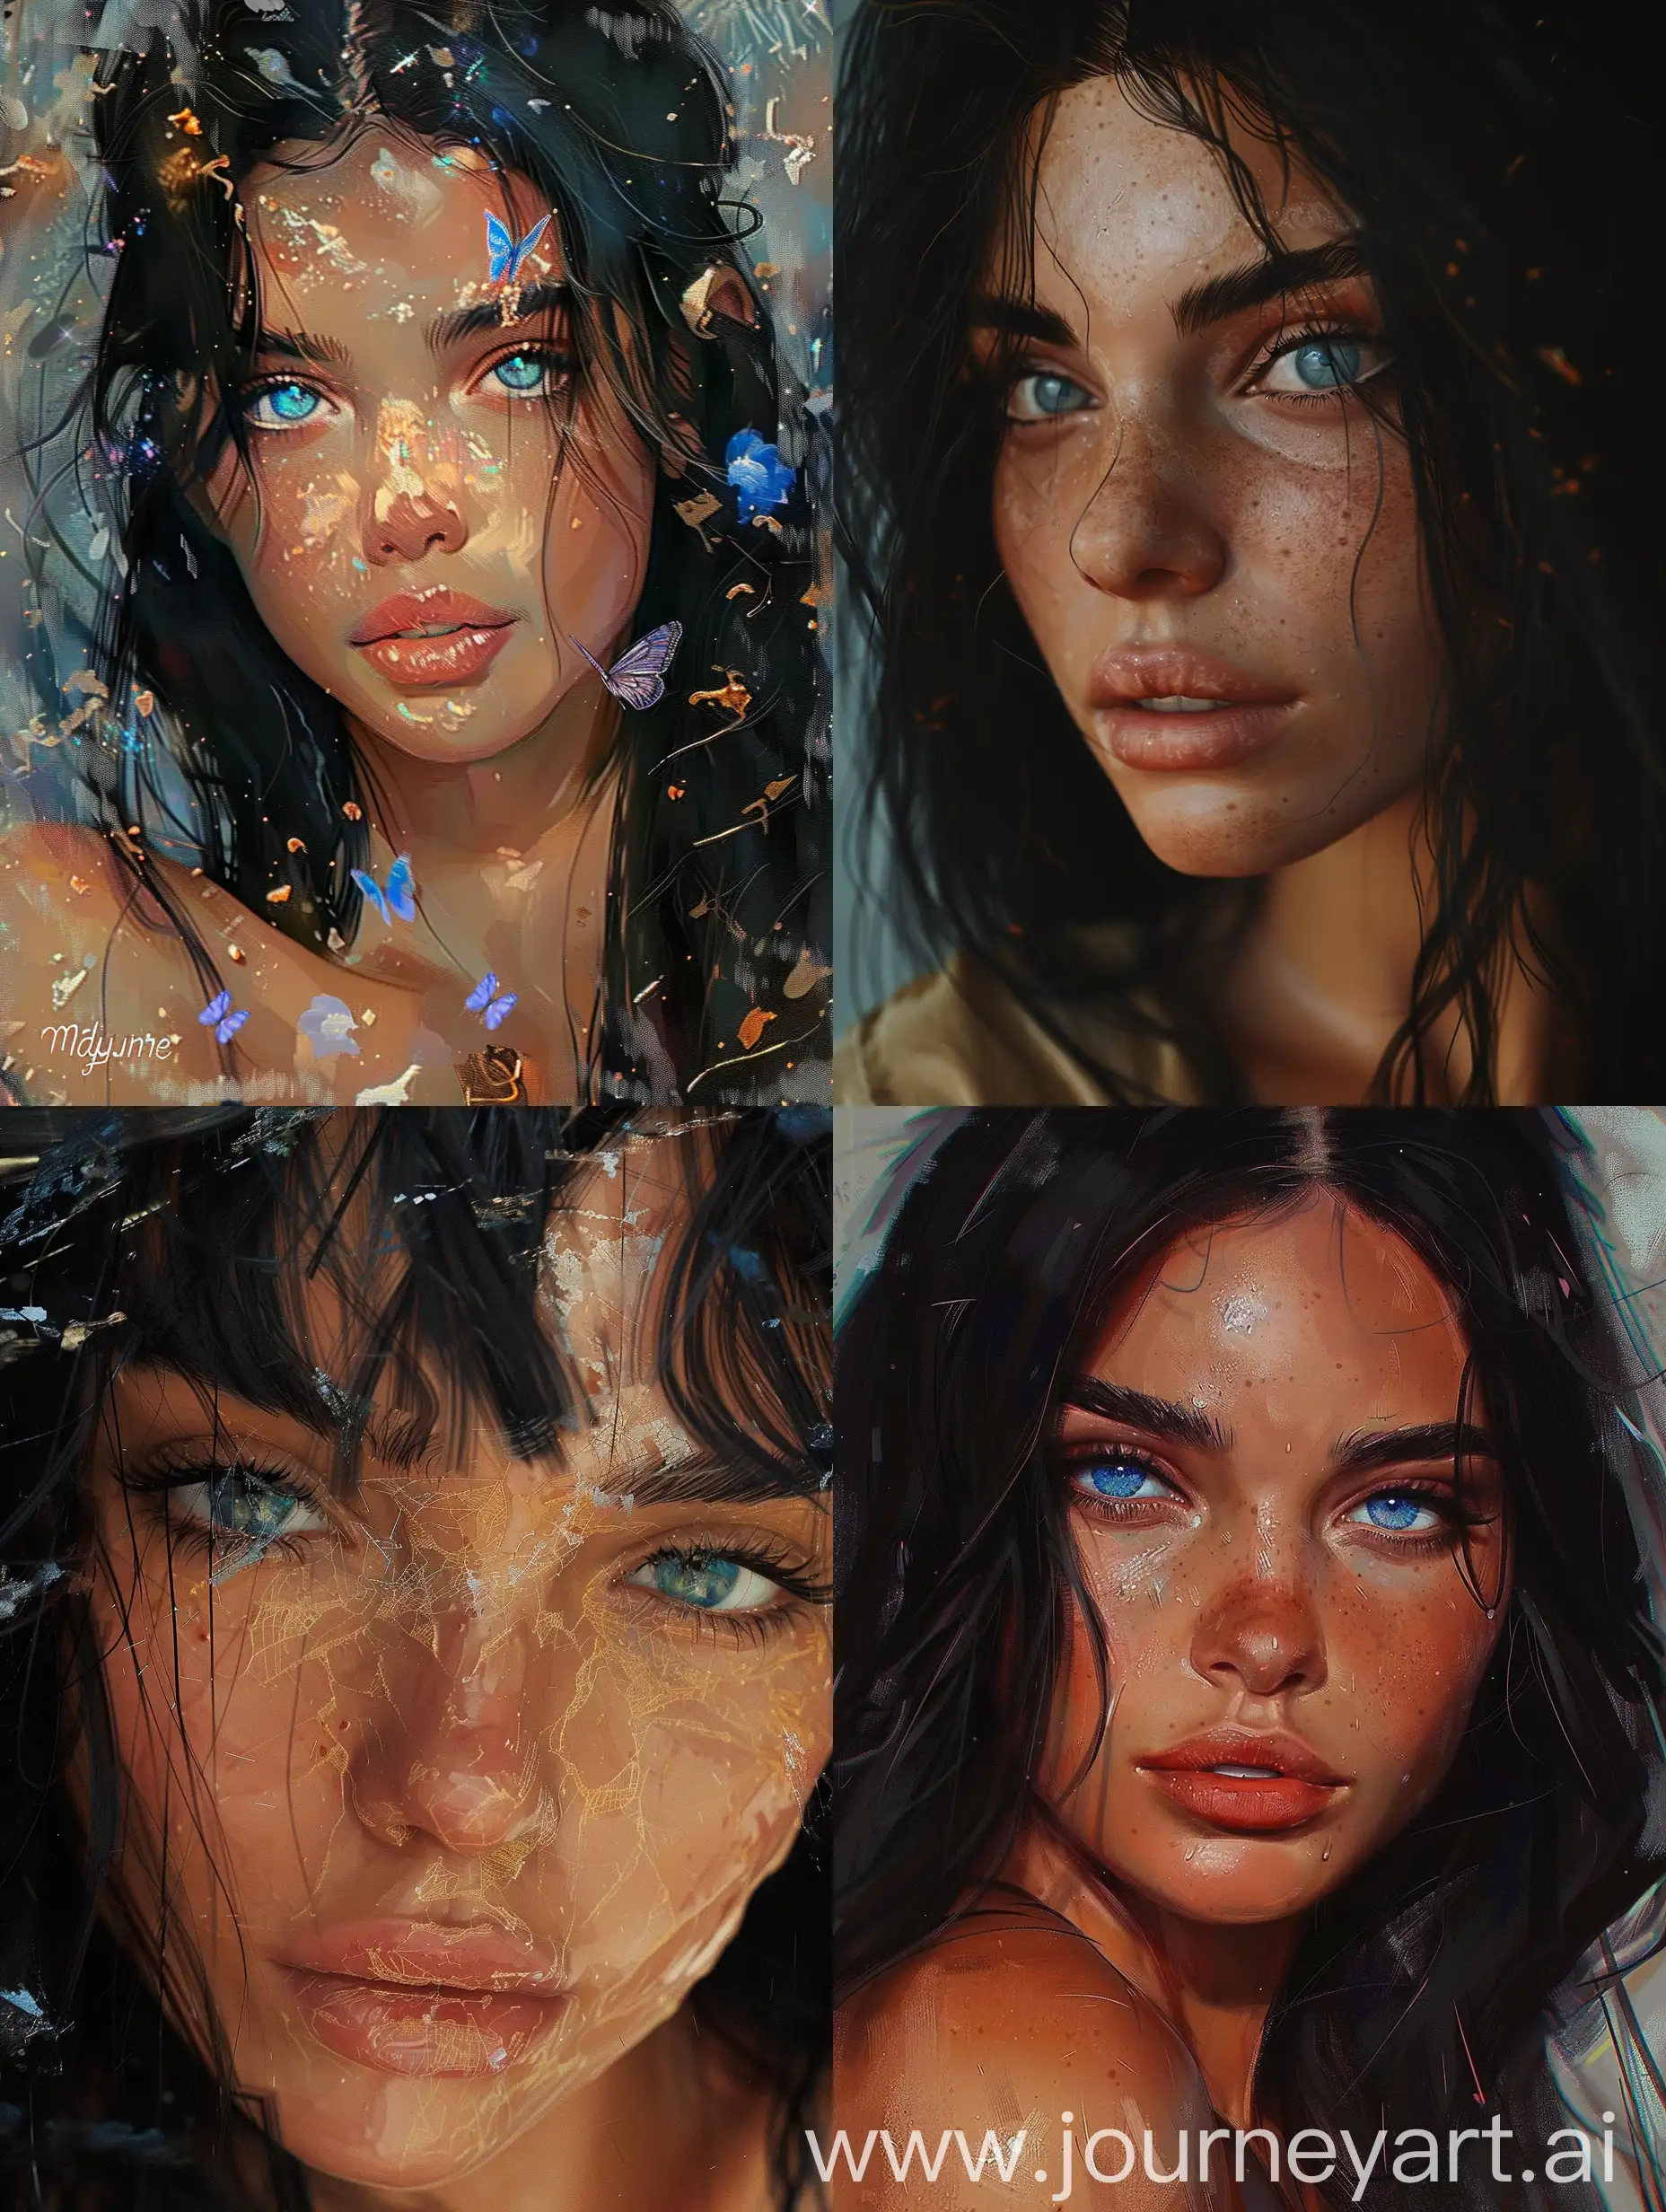 Beautiful-Demigod-with-Tanned-Skin-Black-Hair-and-Blue-Eyes-in-Surreal-Fantasy-Art